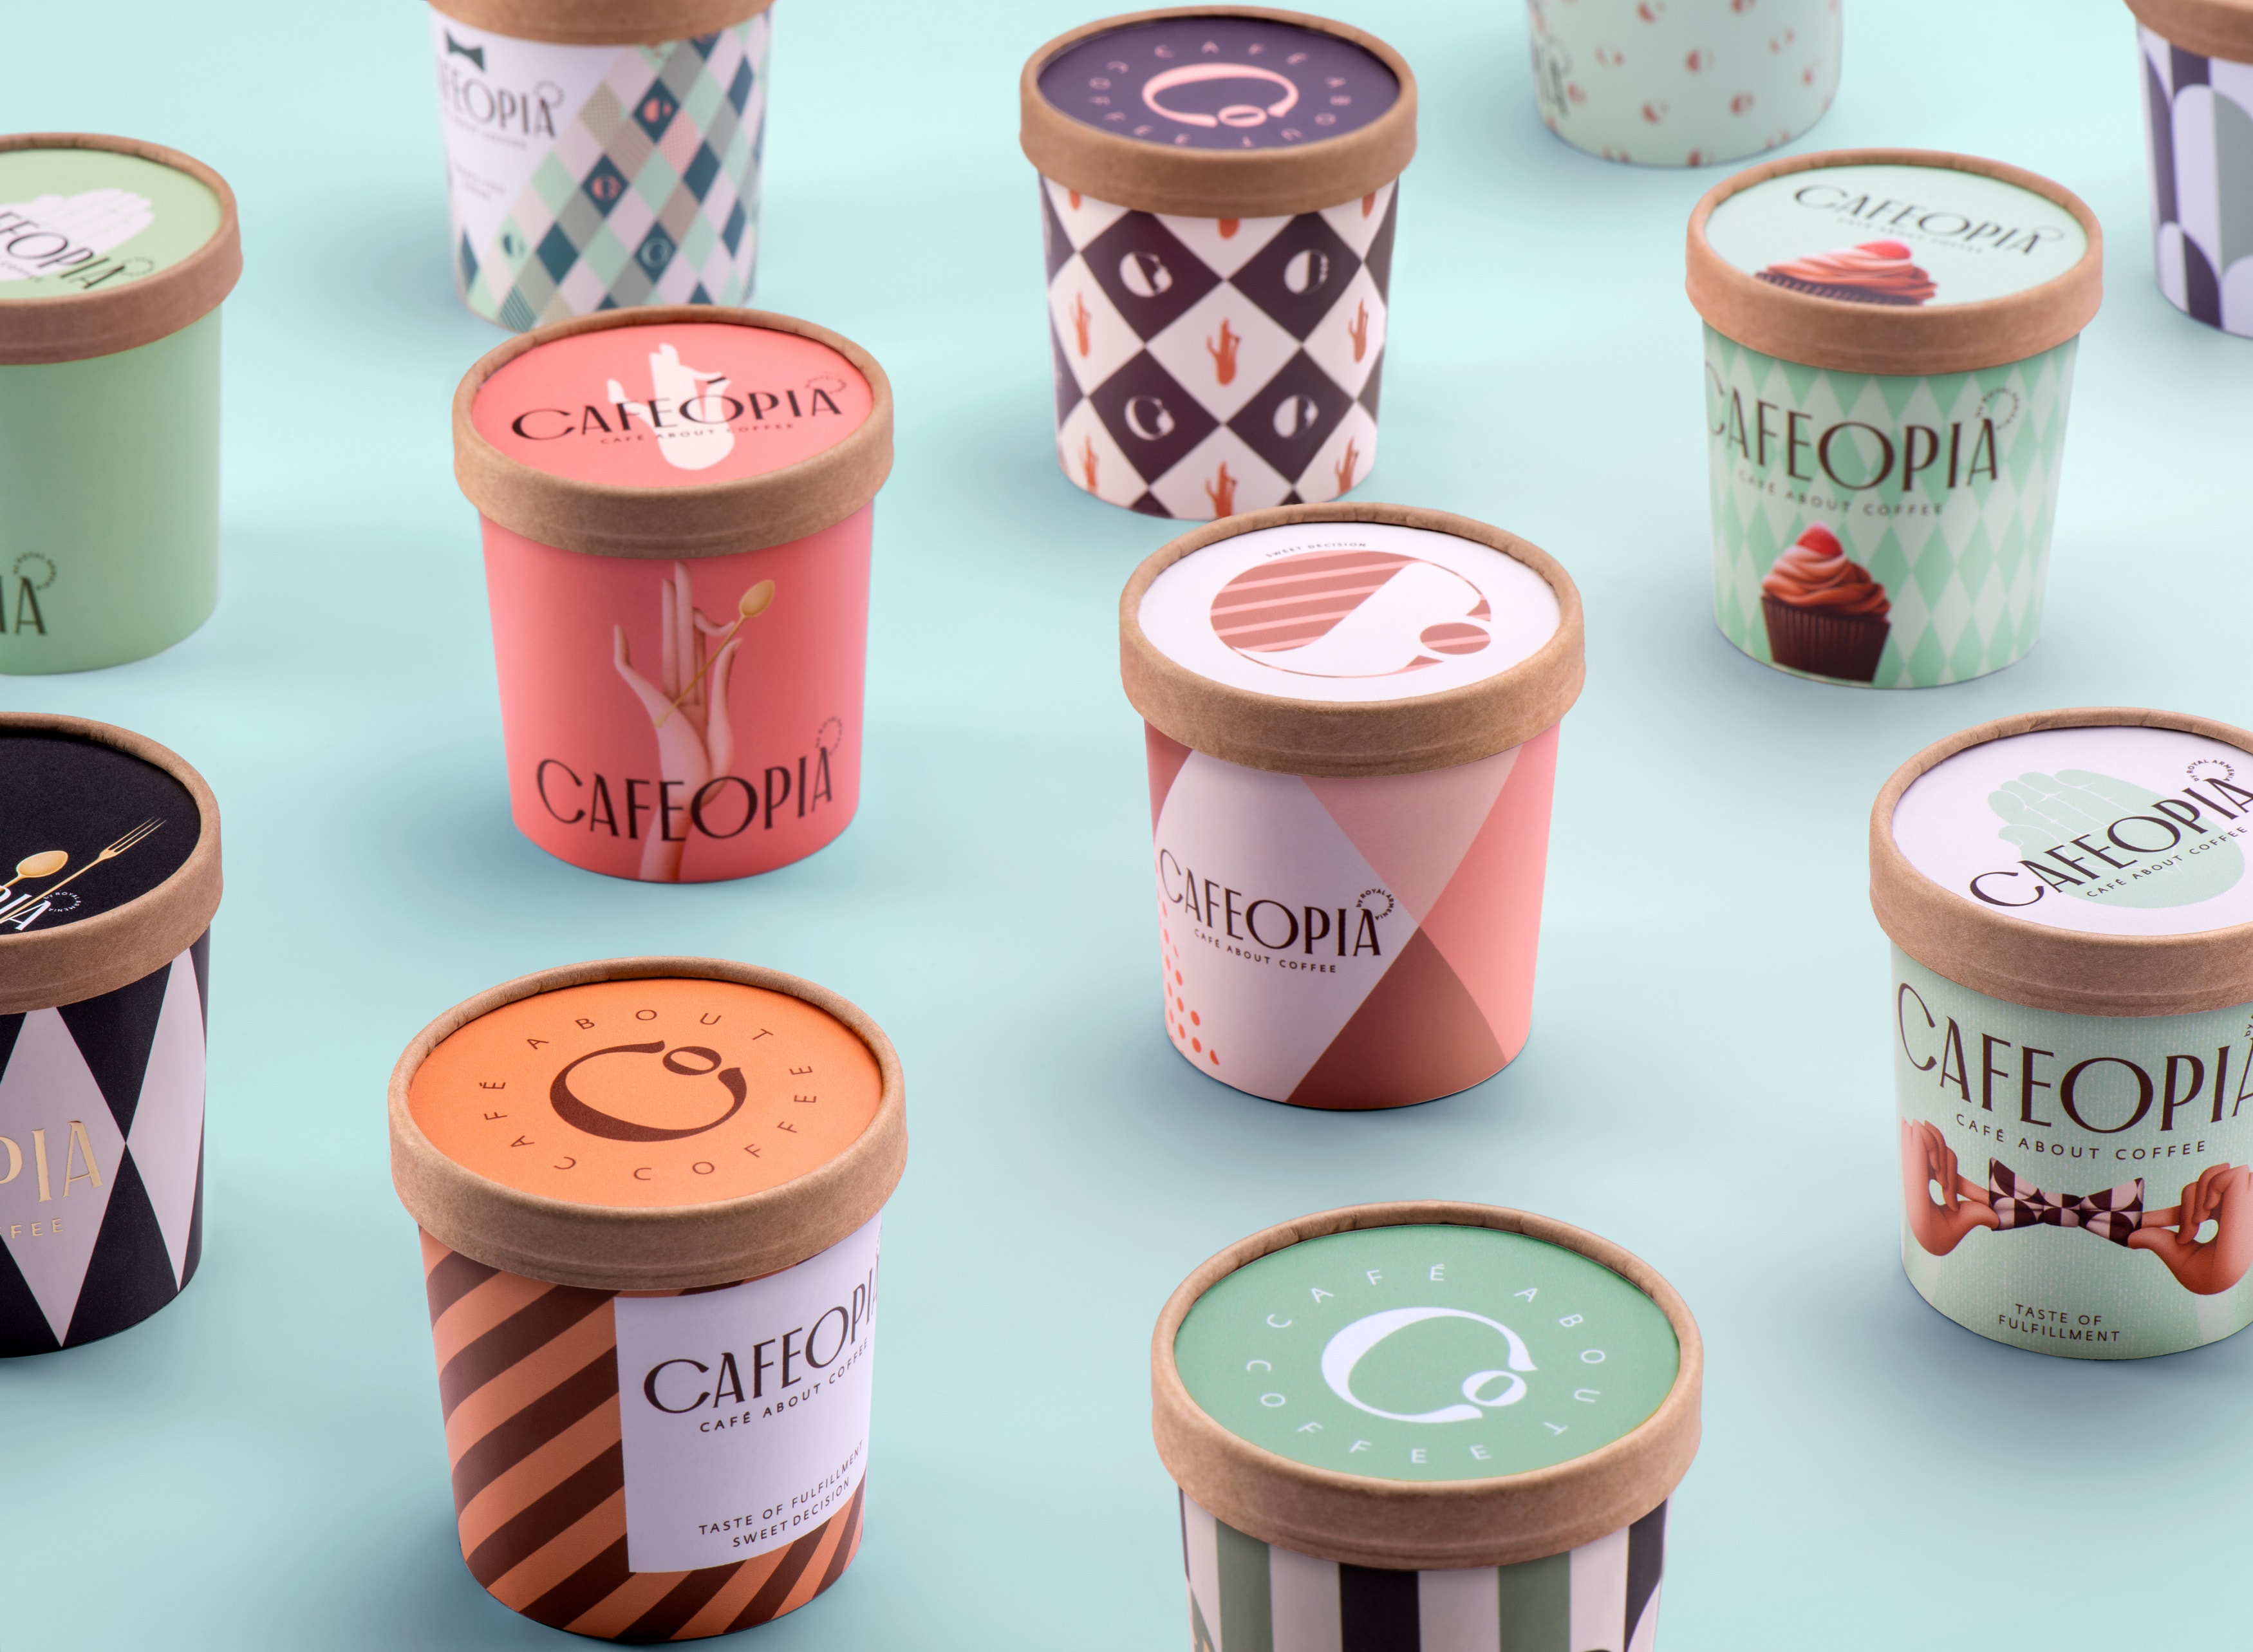 Cafeopia: Brewing a Unique Coffee Experience with Handcrafted Identity and Innovative Packaging Designs